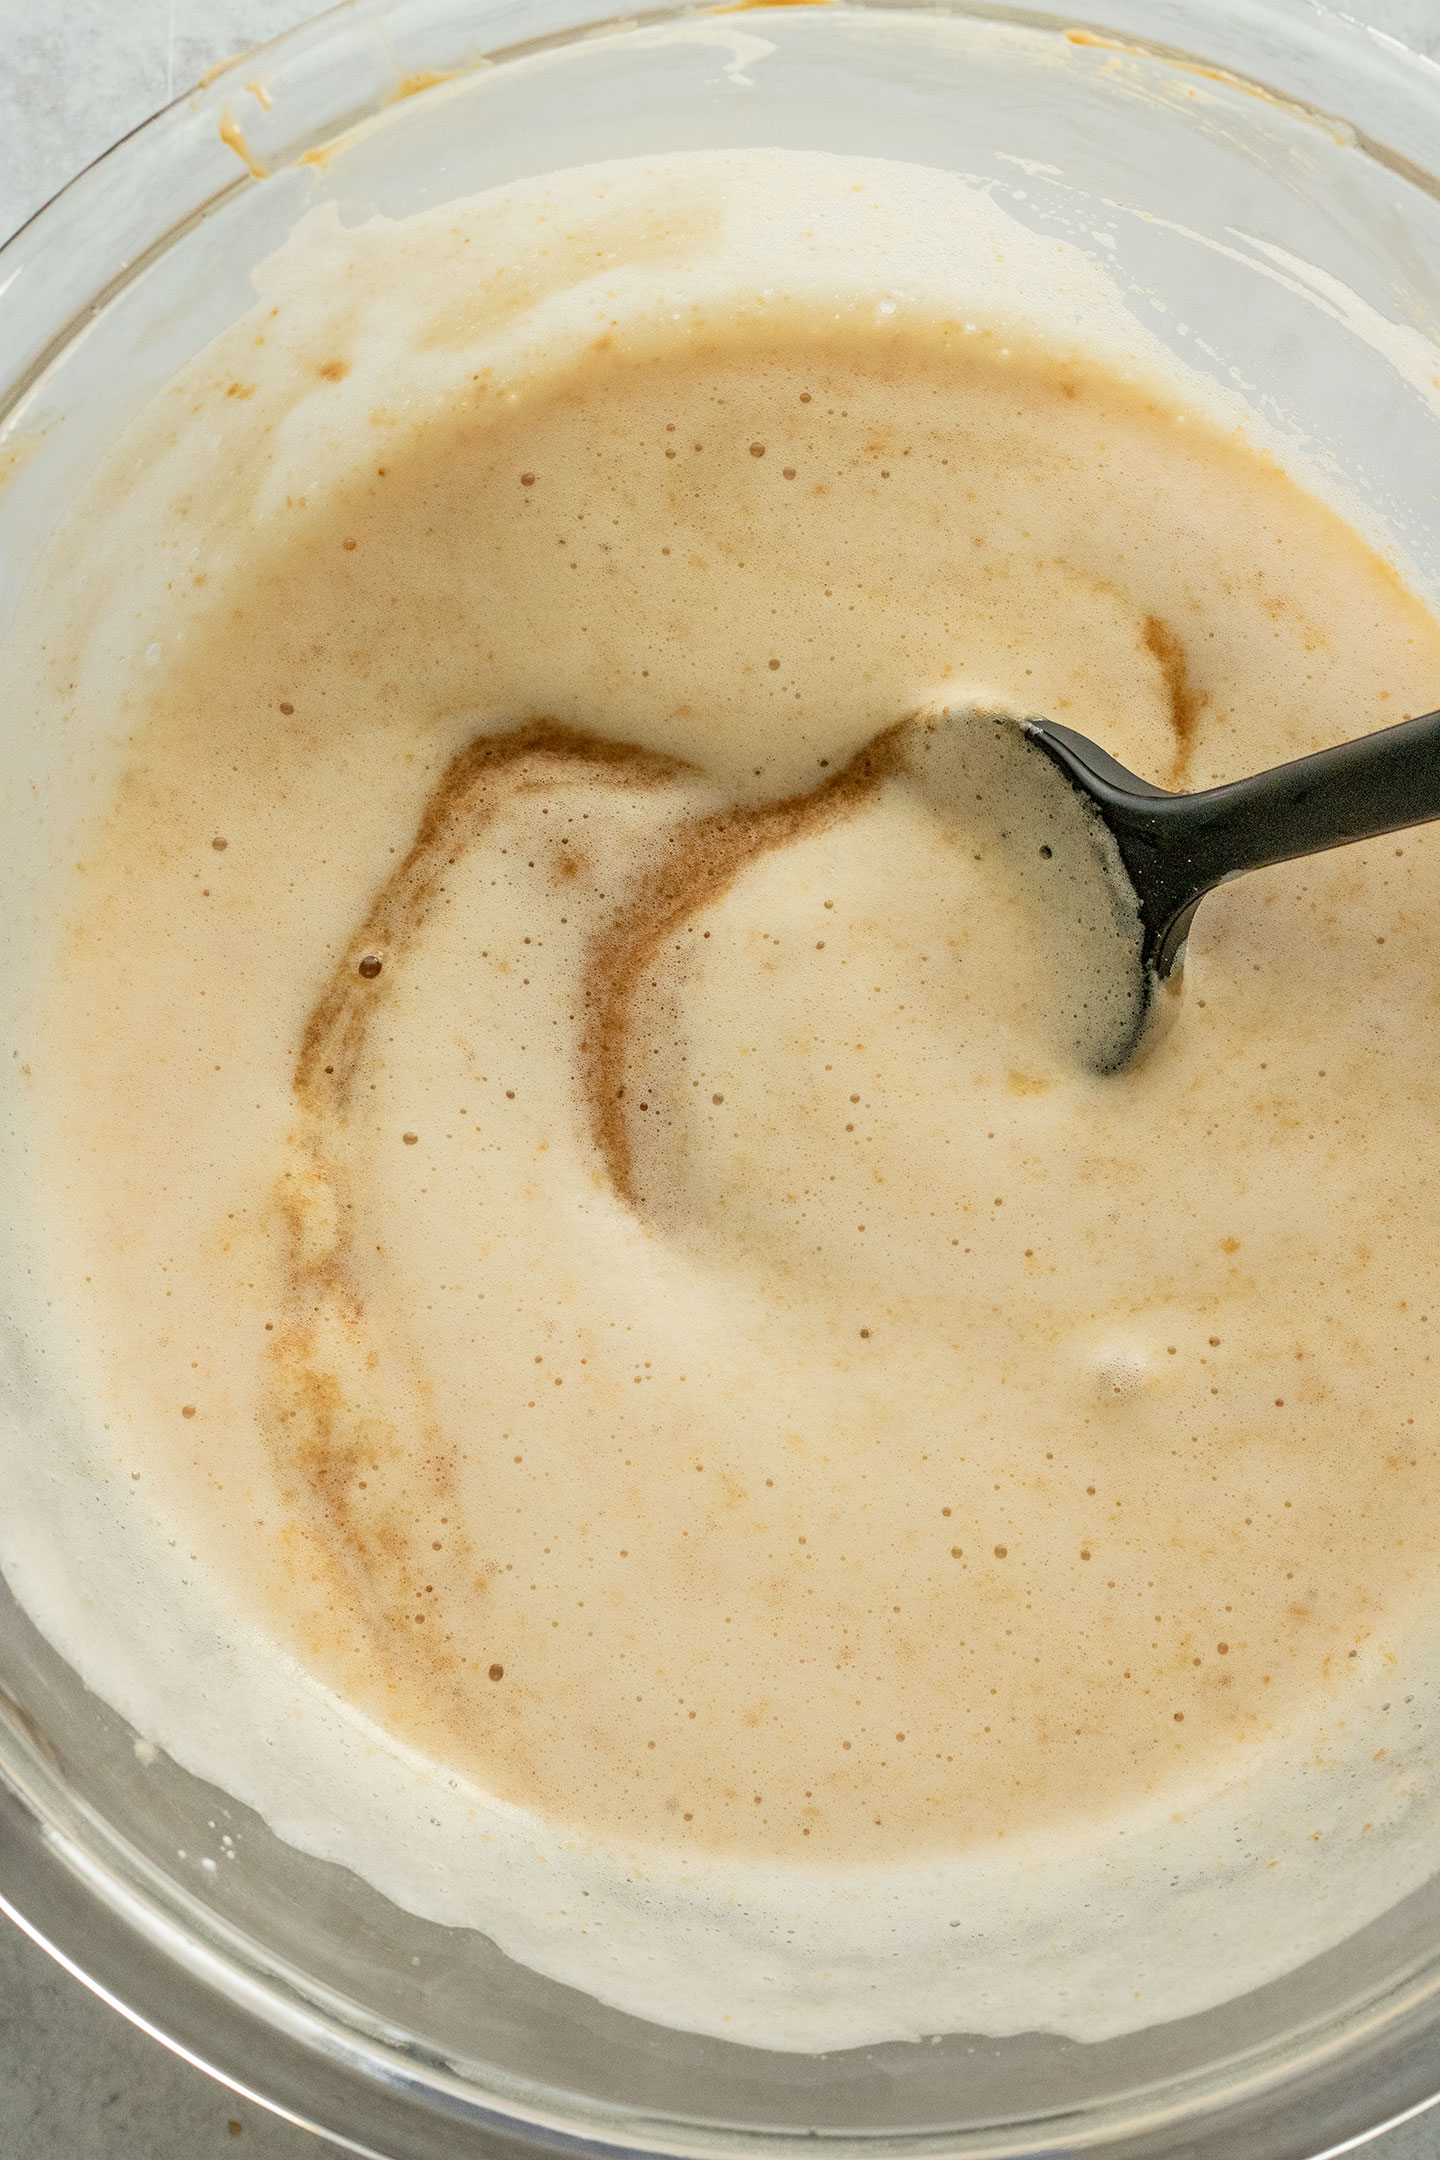 Frothed aquafaba being mixed with the peanut butter and brown sugar in a mixing bowl.